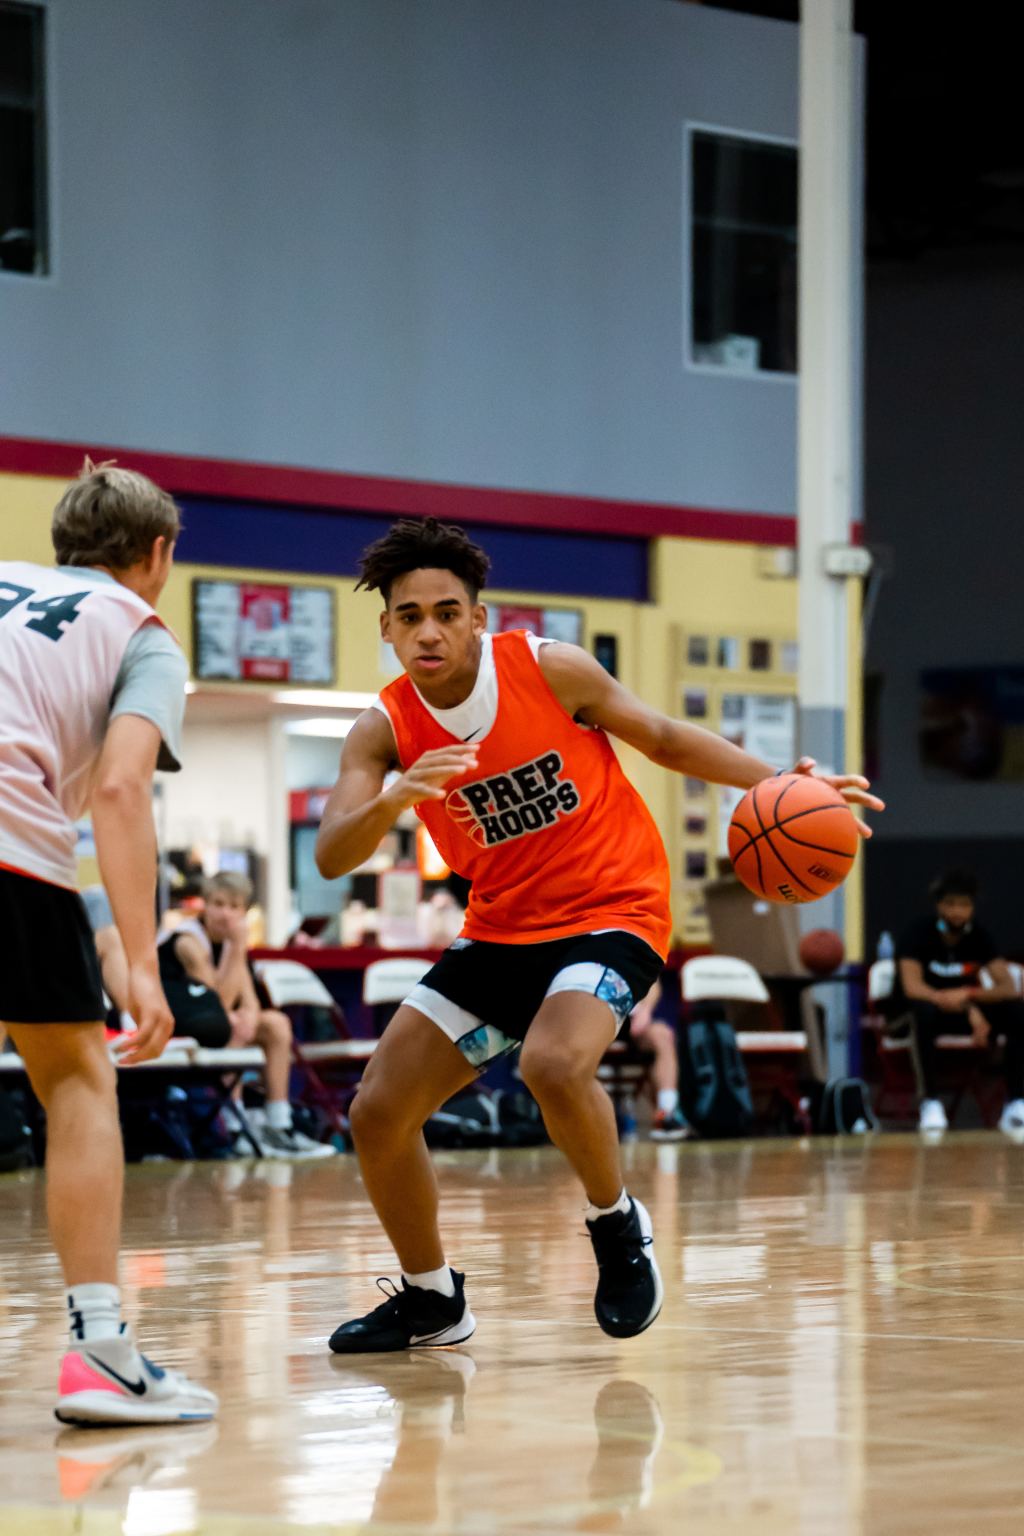 Top 250 Expo: Top Small Forwards